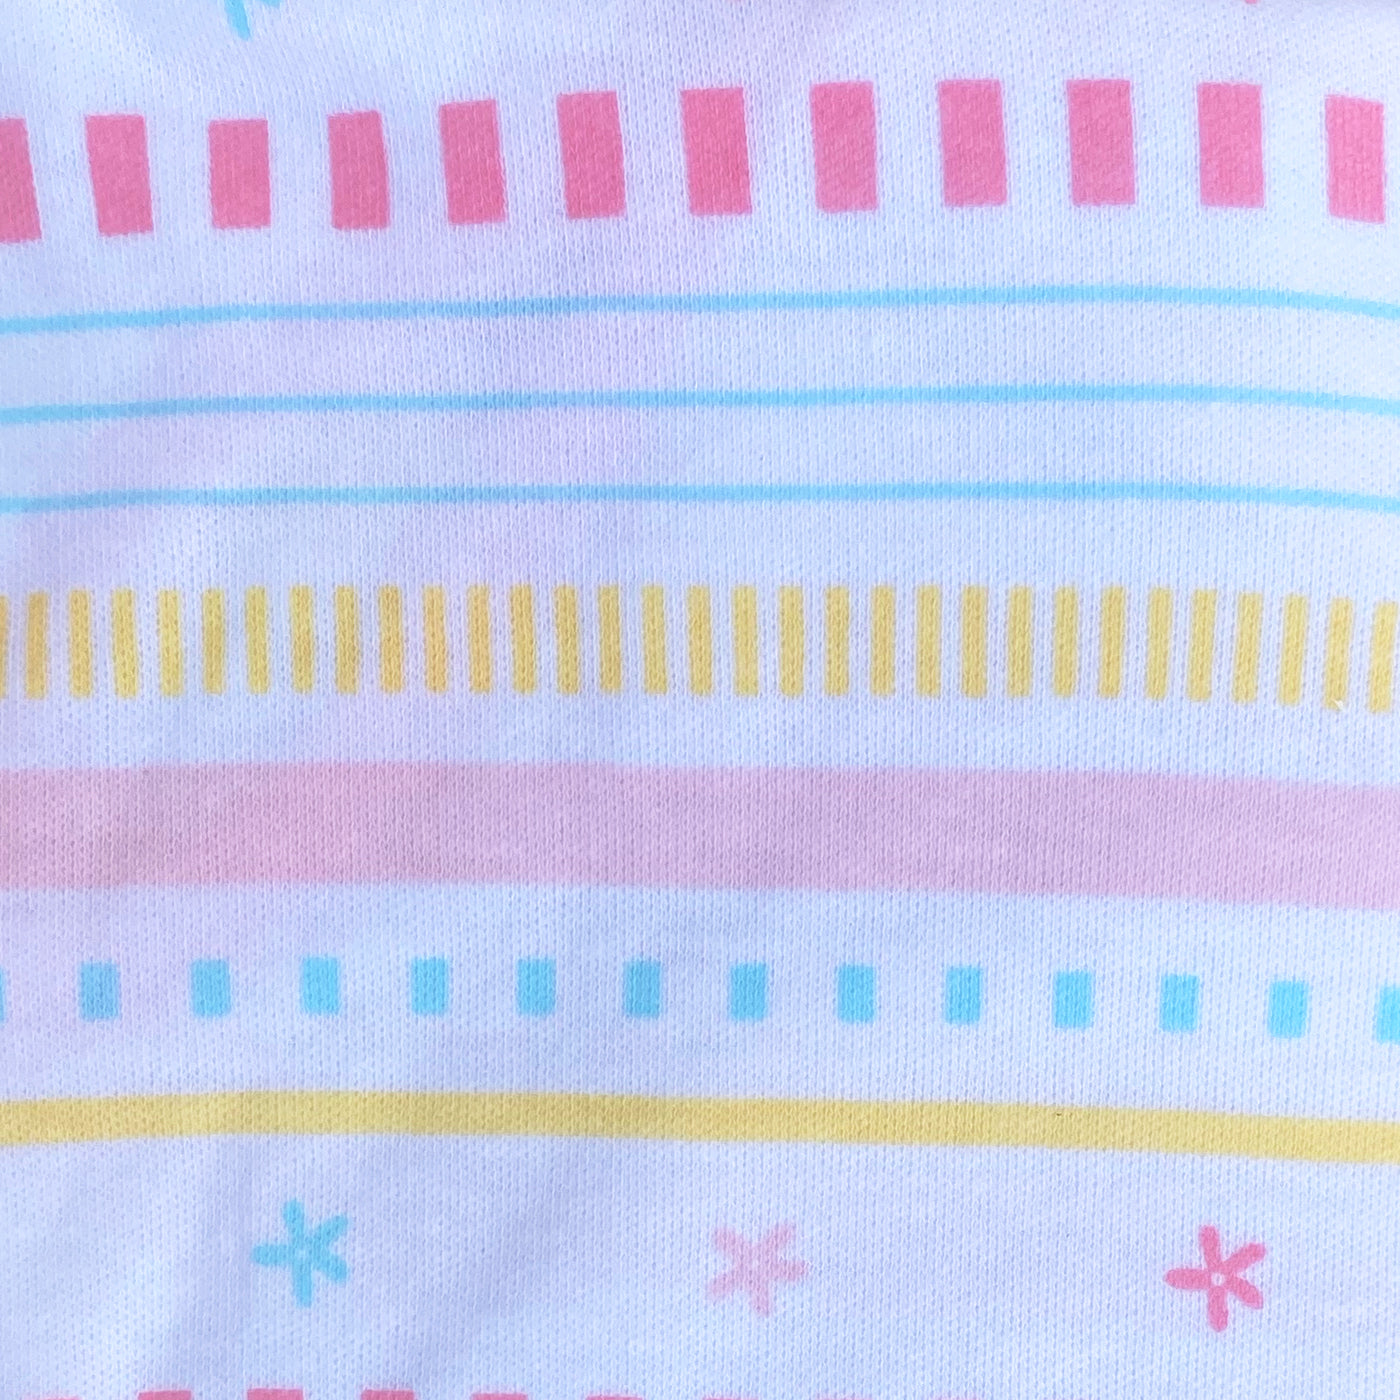 Baby Wrap Swaddle Magic Tape 0-3 months - 0805 - Little Kooma